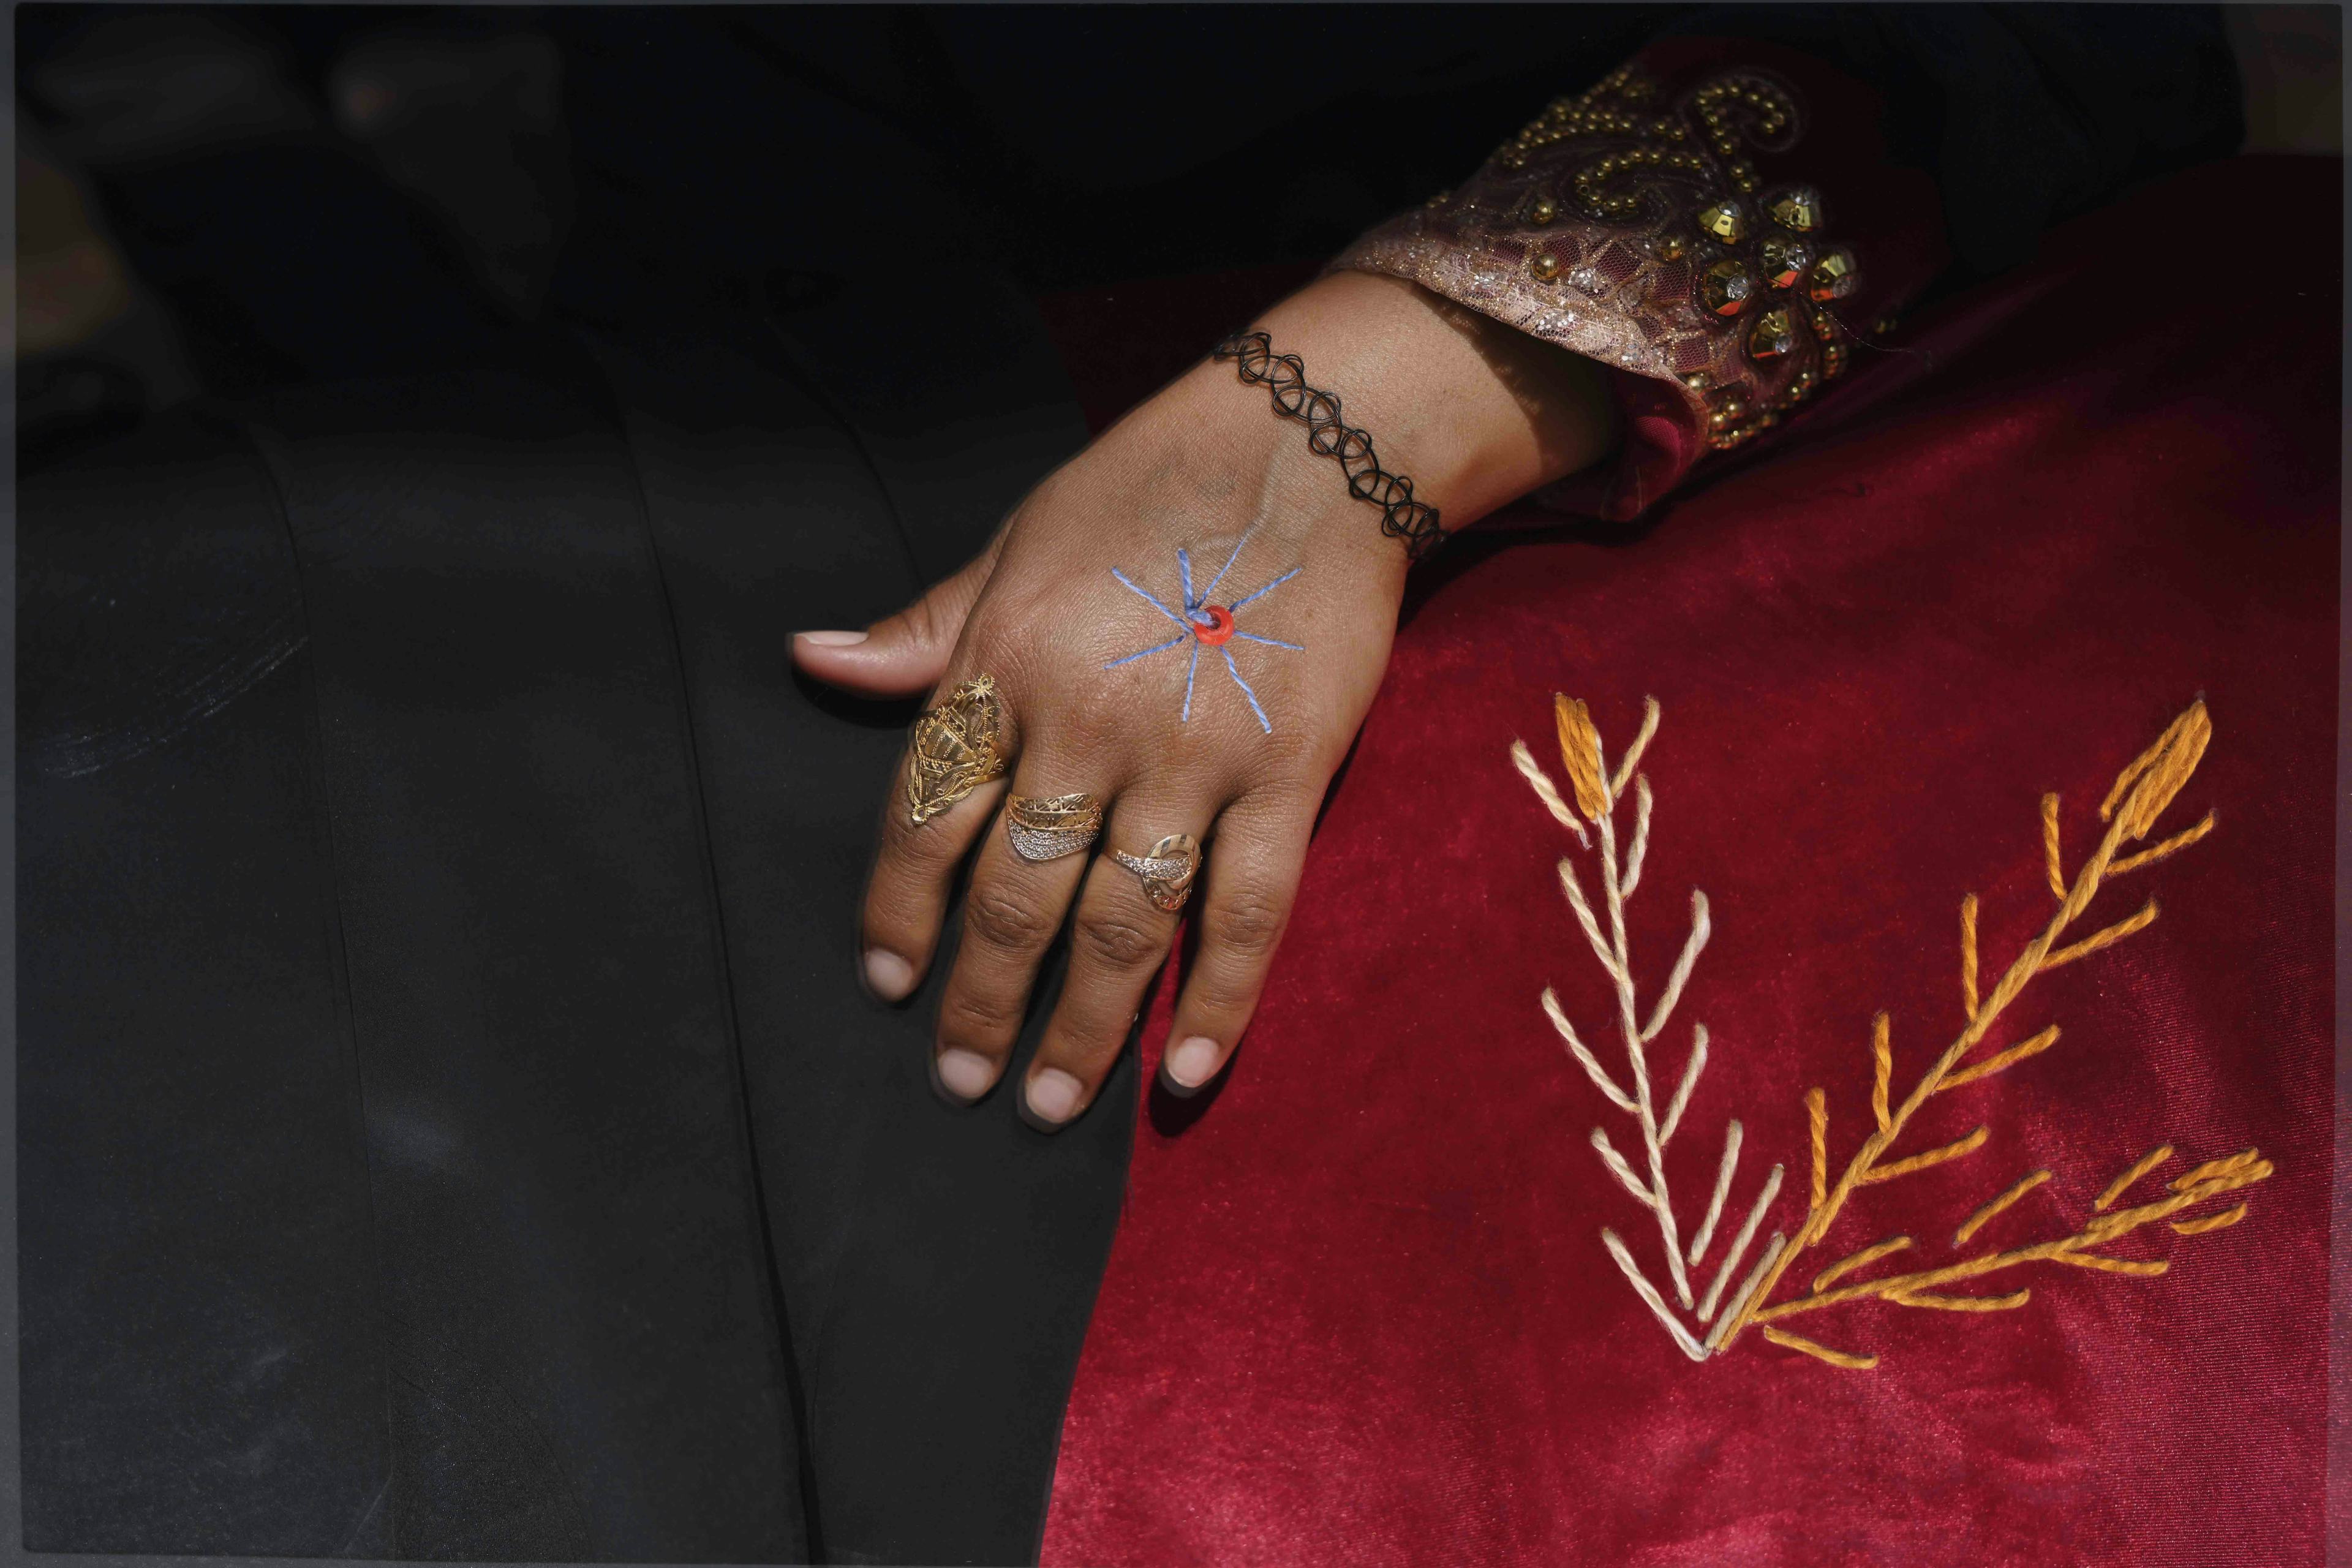 Close-up of a woman's hand, with bracelet and rings. Some geometric embroidering is covering her skirt and hand© Rehab Eldalil